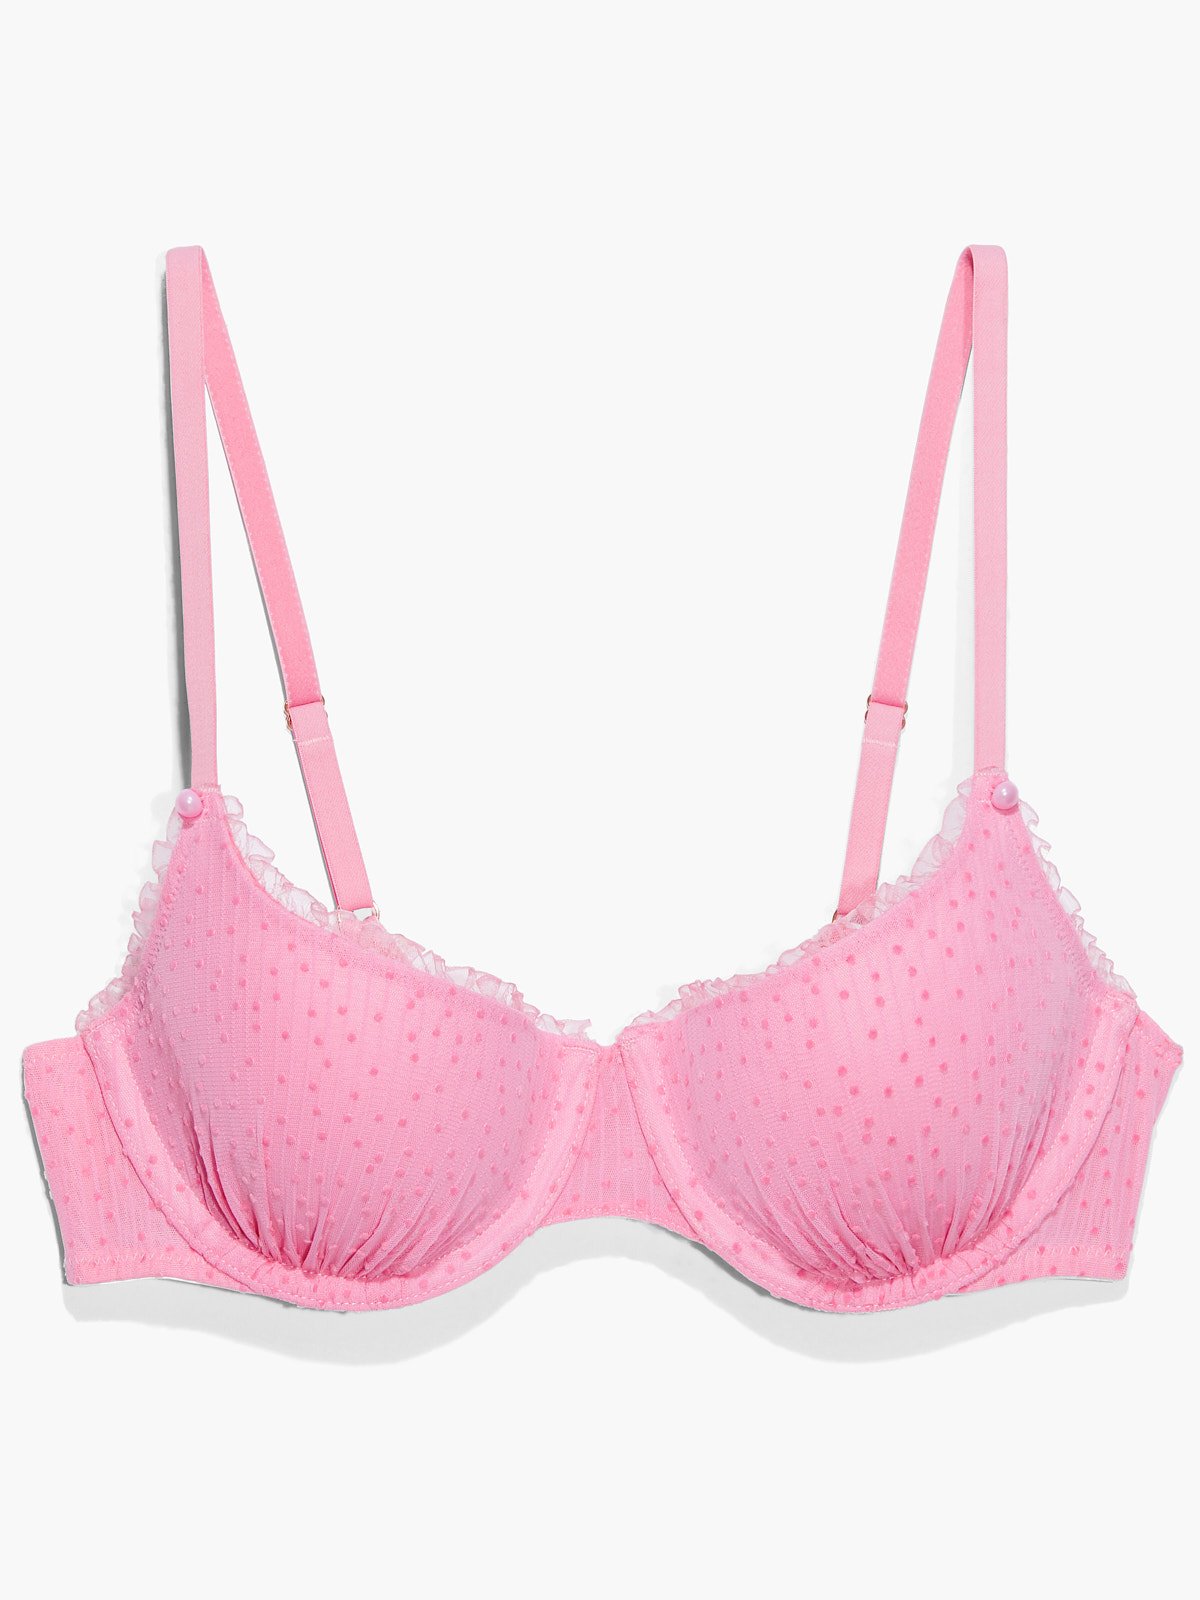 A Comfortable Bralette: CLF Savage X Cotton Jersey Bralette, Savage X  Fenty's Breast Cancer Awareness Collection Is Pretty-in-Pink Coziness